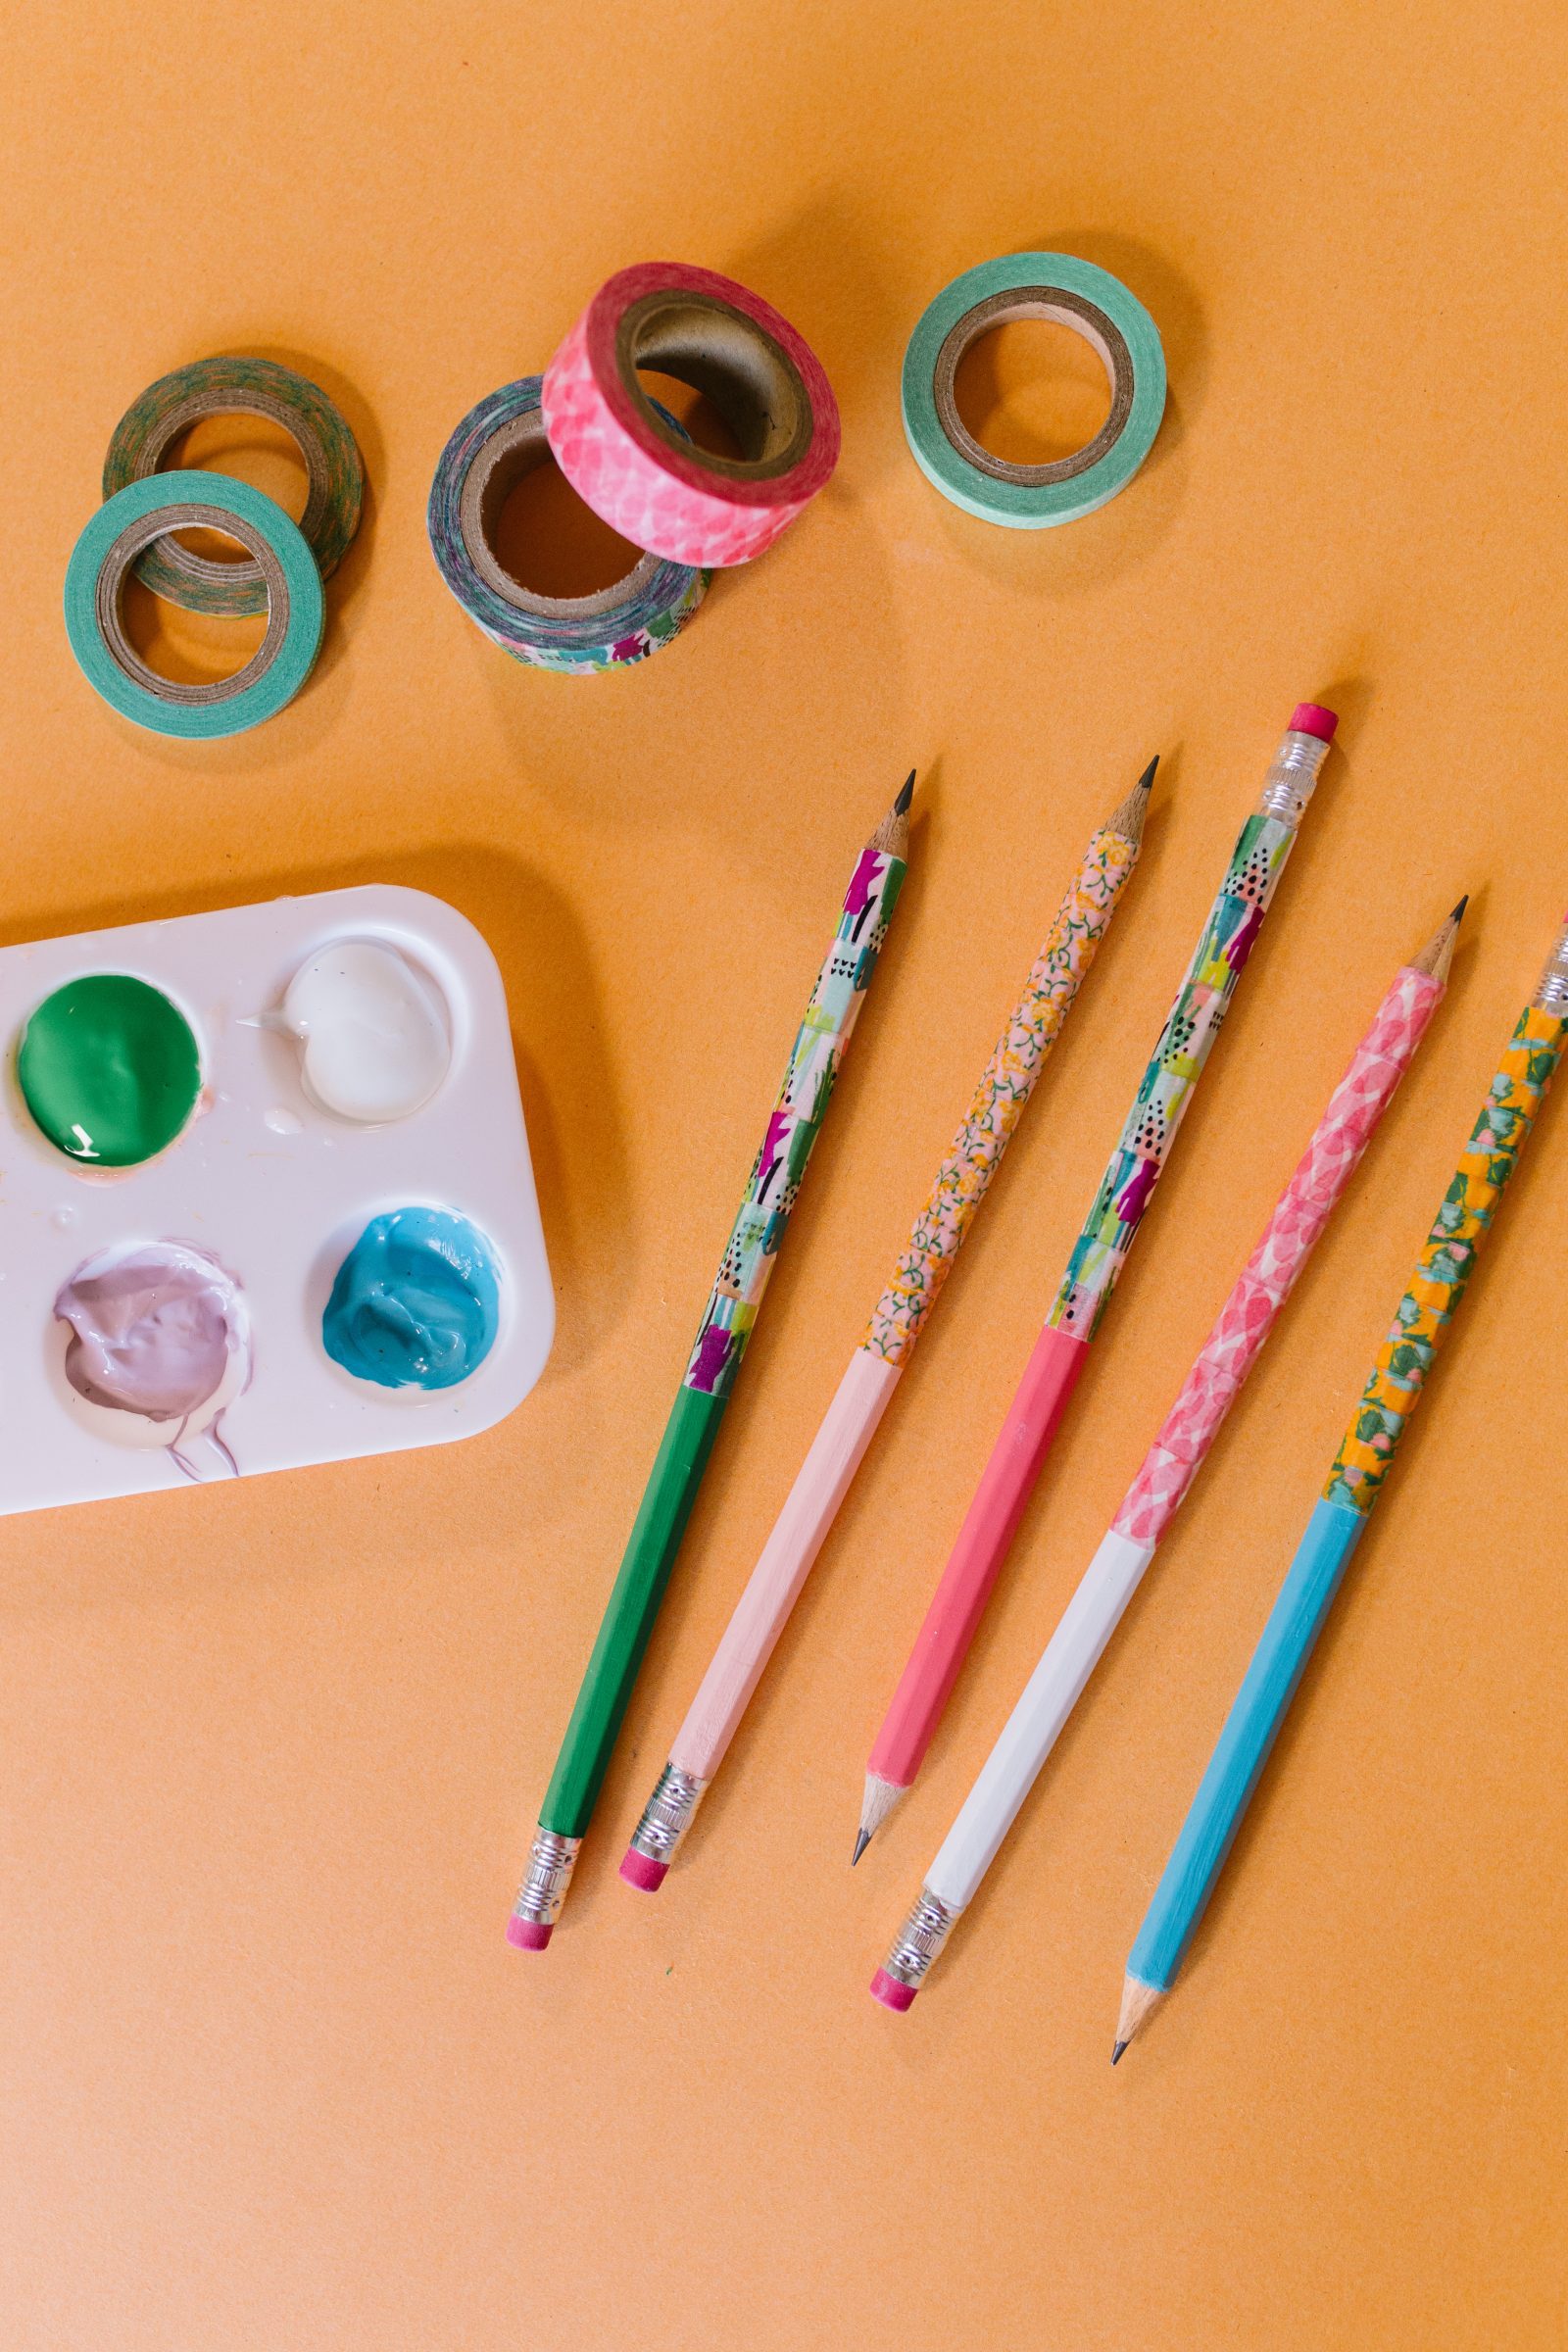 Back to School Crafts: How to Make Embellished Pencils 3 Ways + a tutorial featured by Top US Craft Blog + The Pretty Life Girls + Color Blocked Washi Embellished Pencils